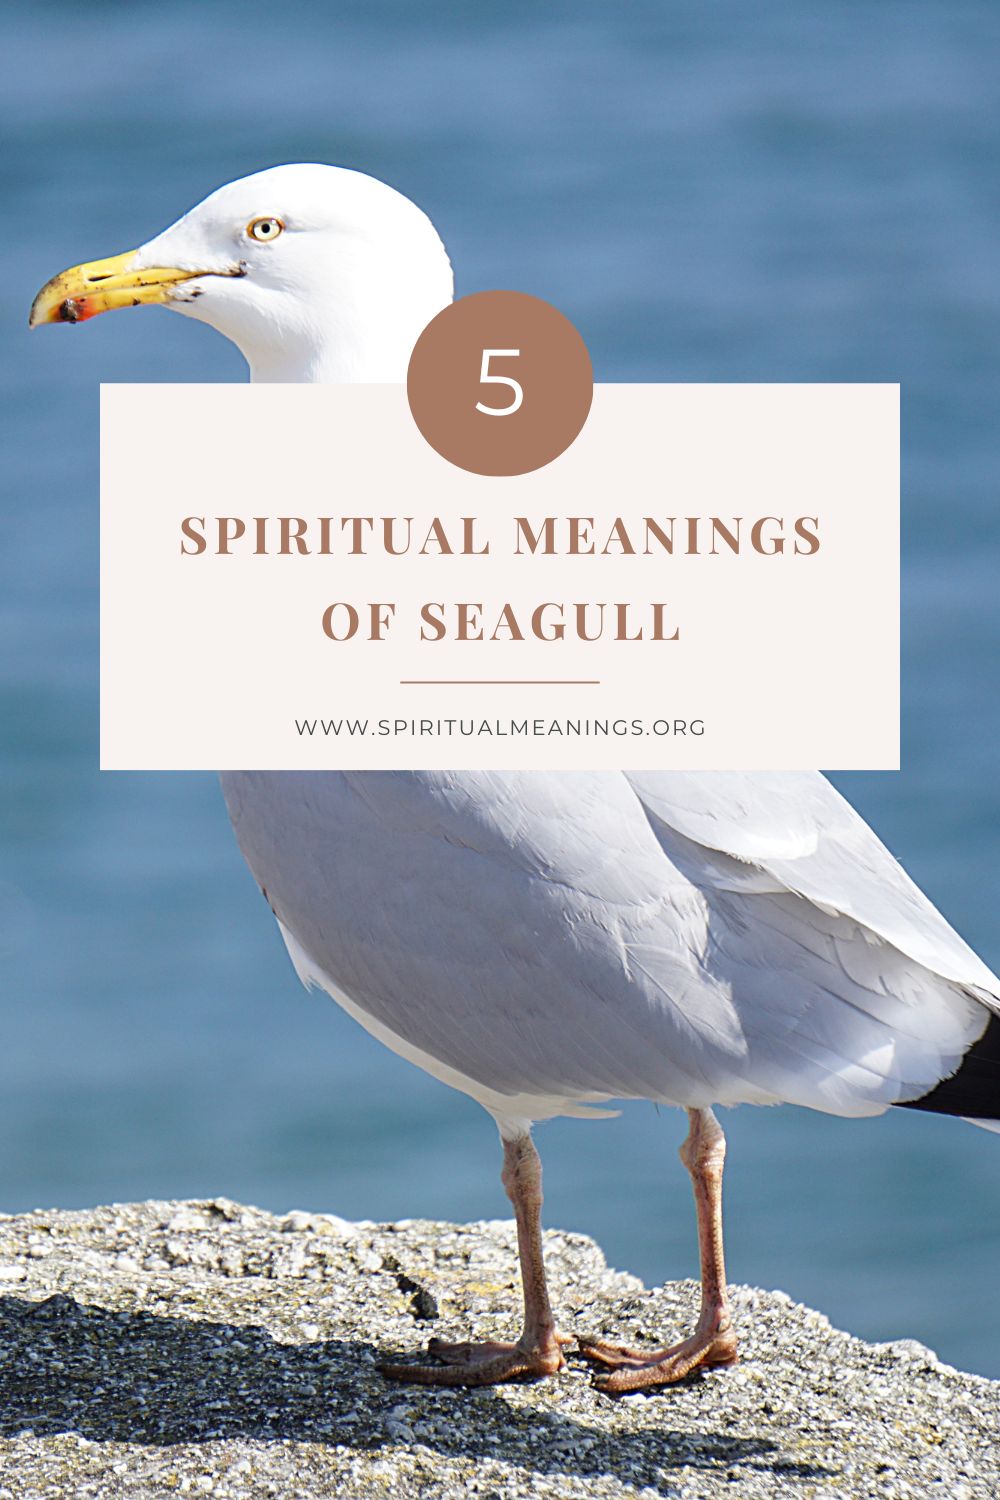 5 Spiritual Meanings of Seagull